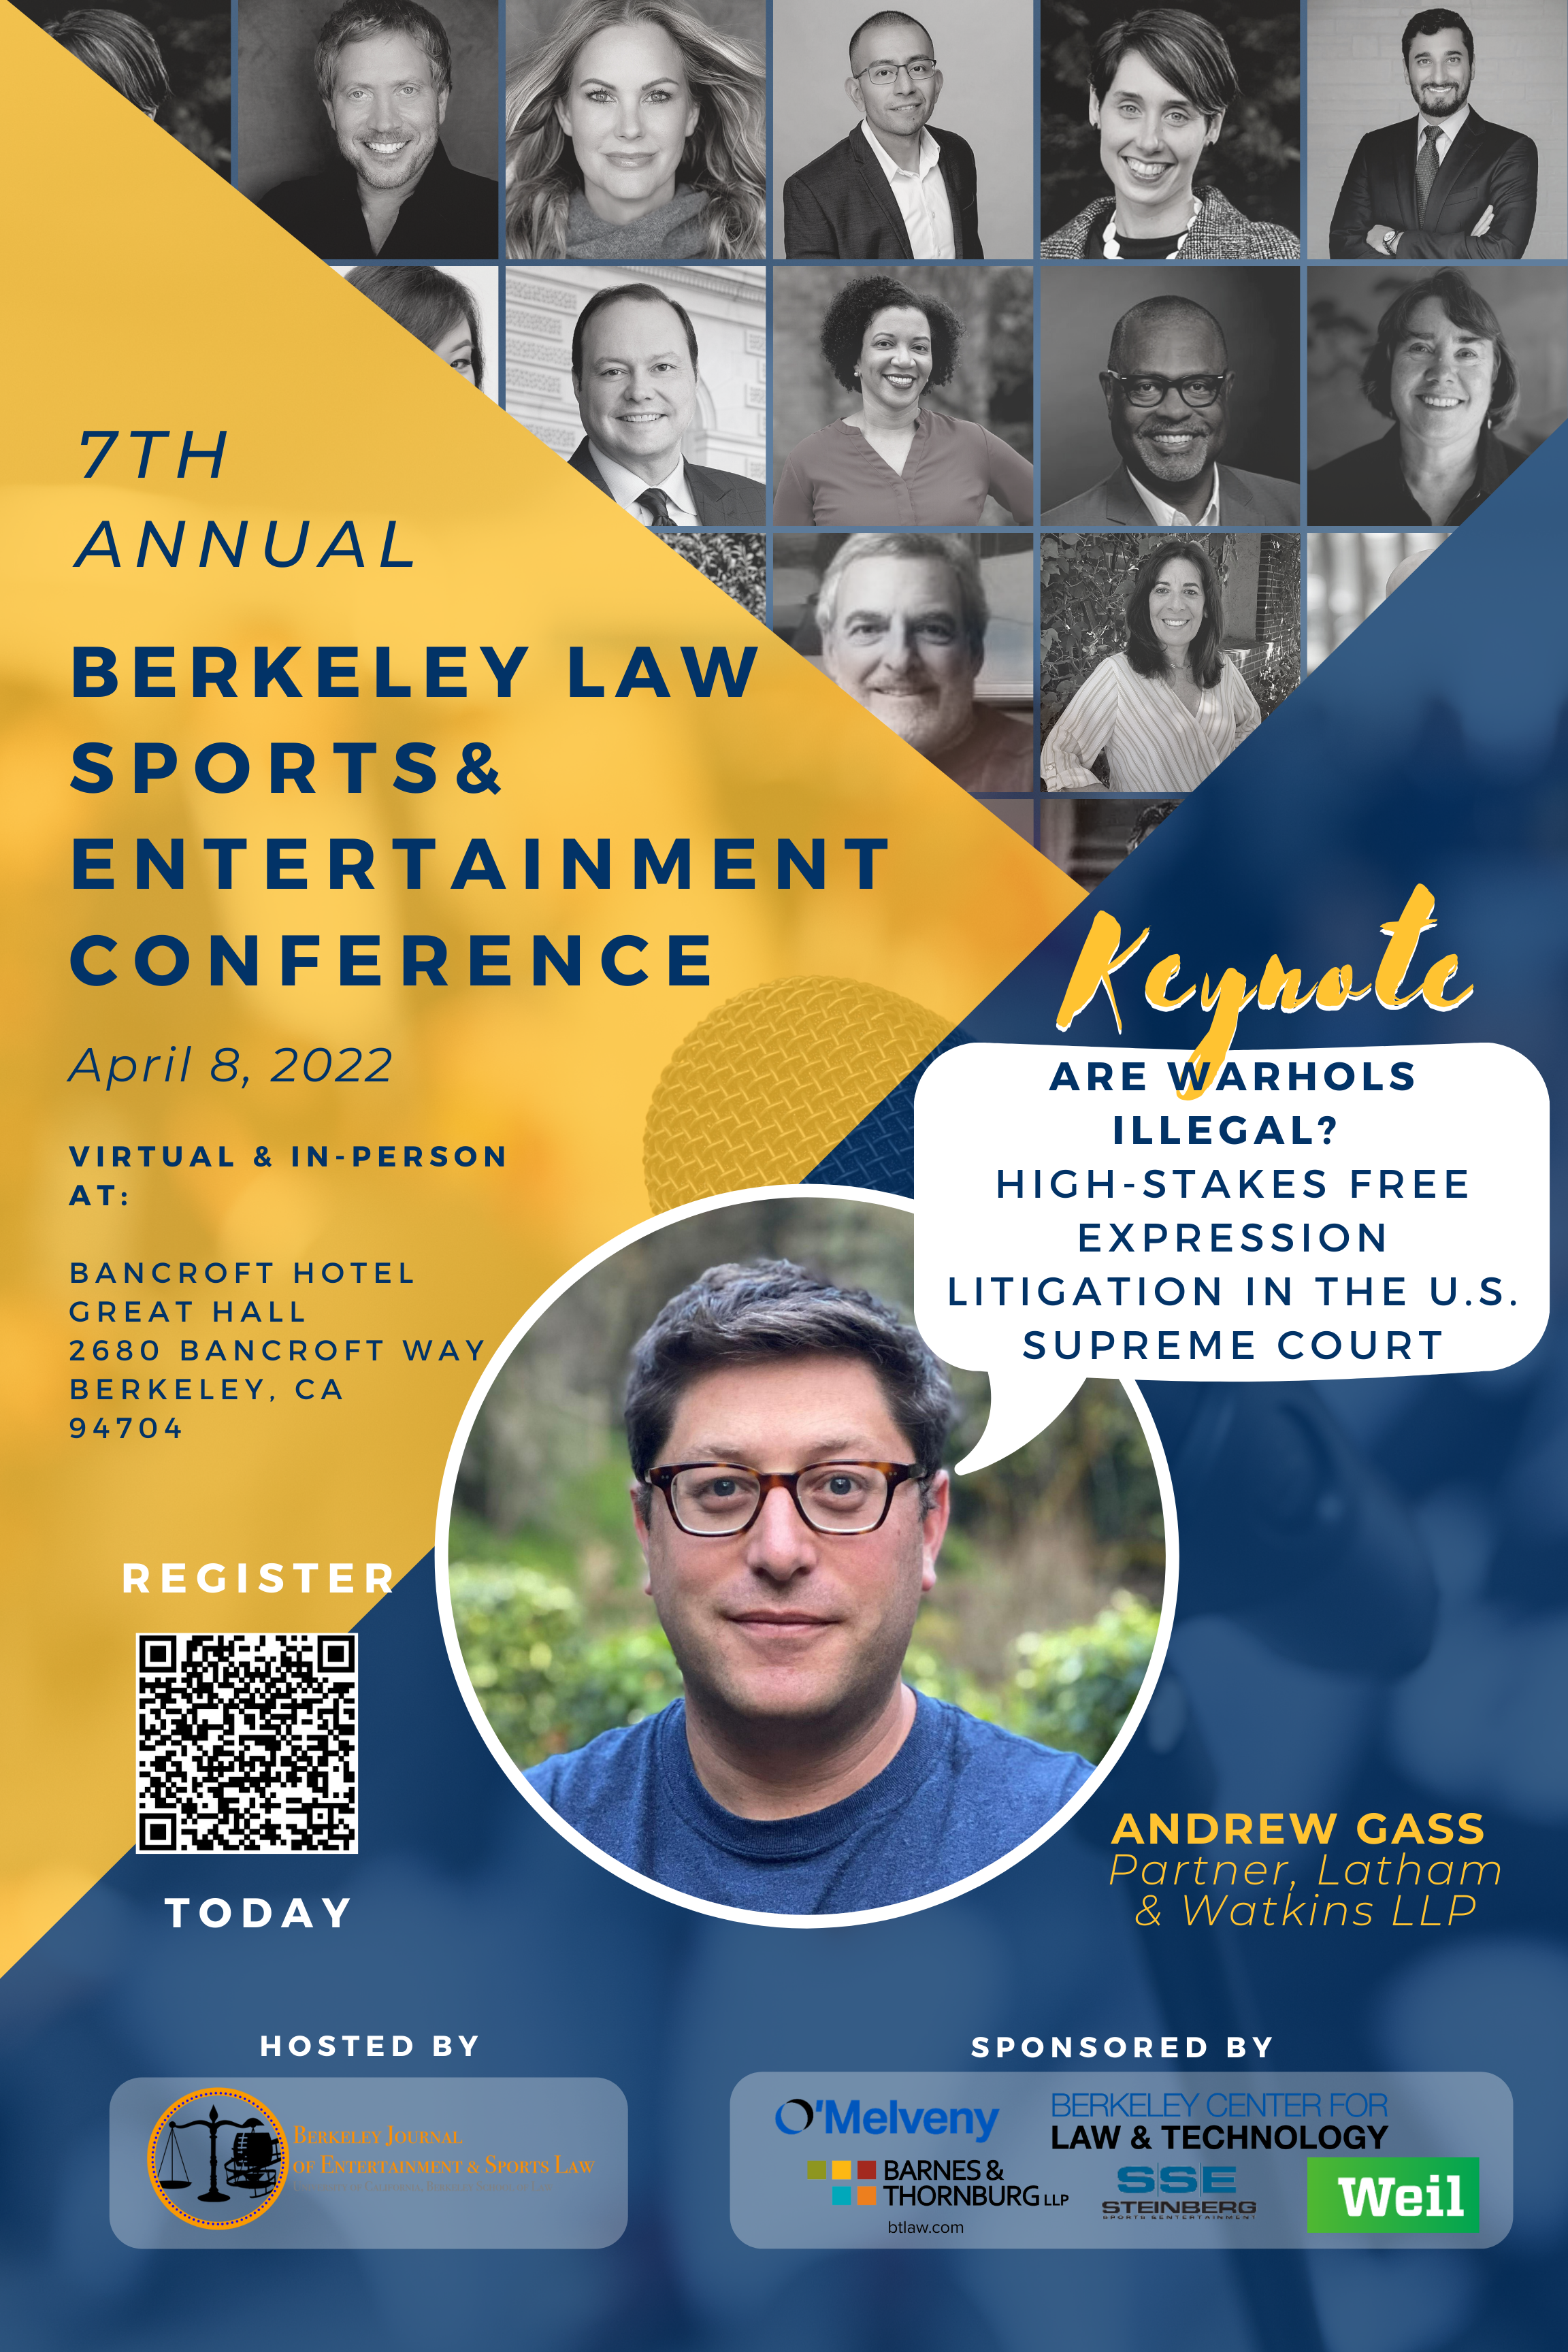 A-list Roster Tackles Hot-button Topics at Sports & Society Conference -  Berkeley Law